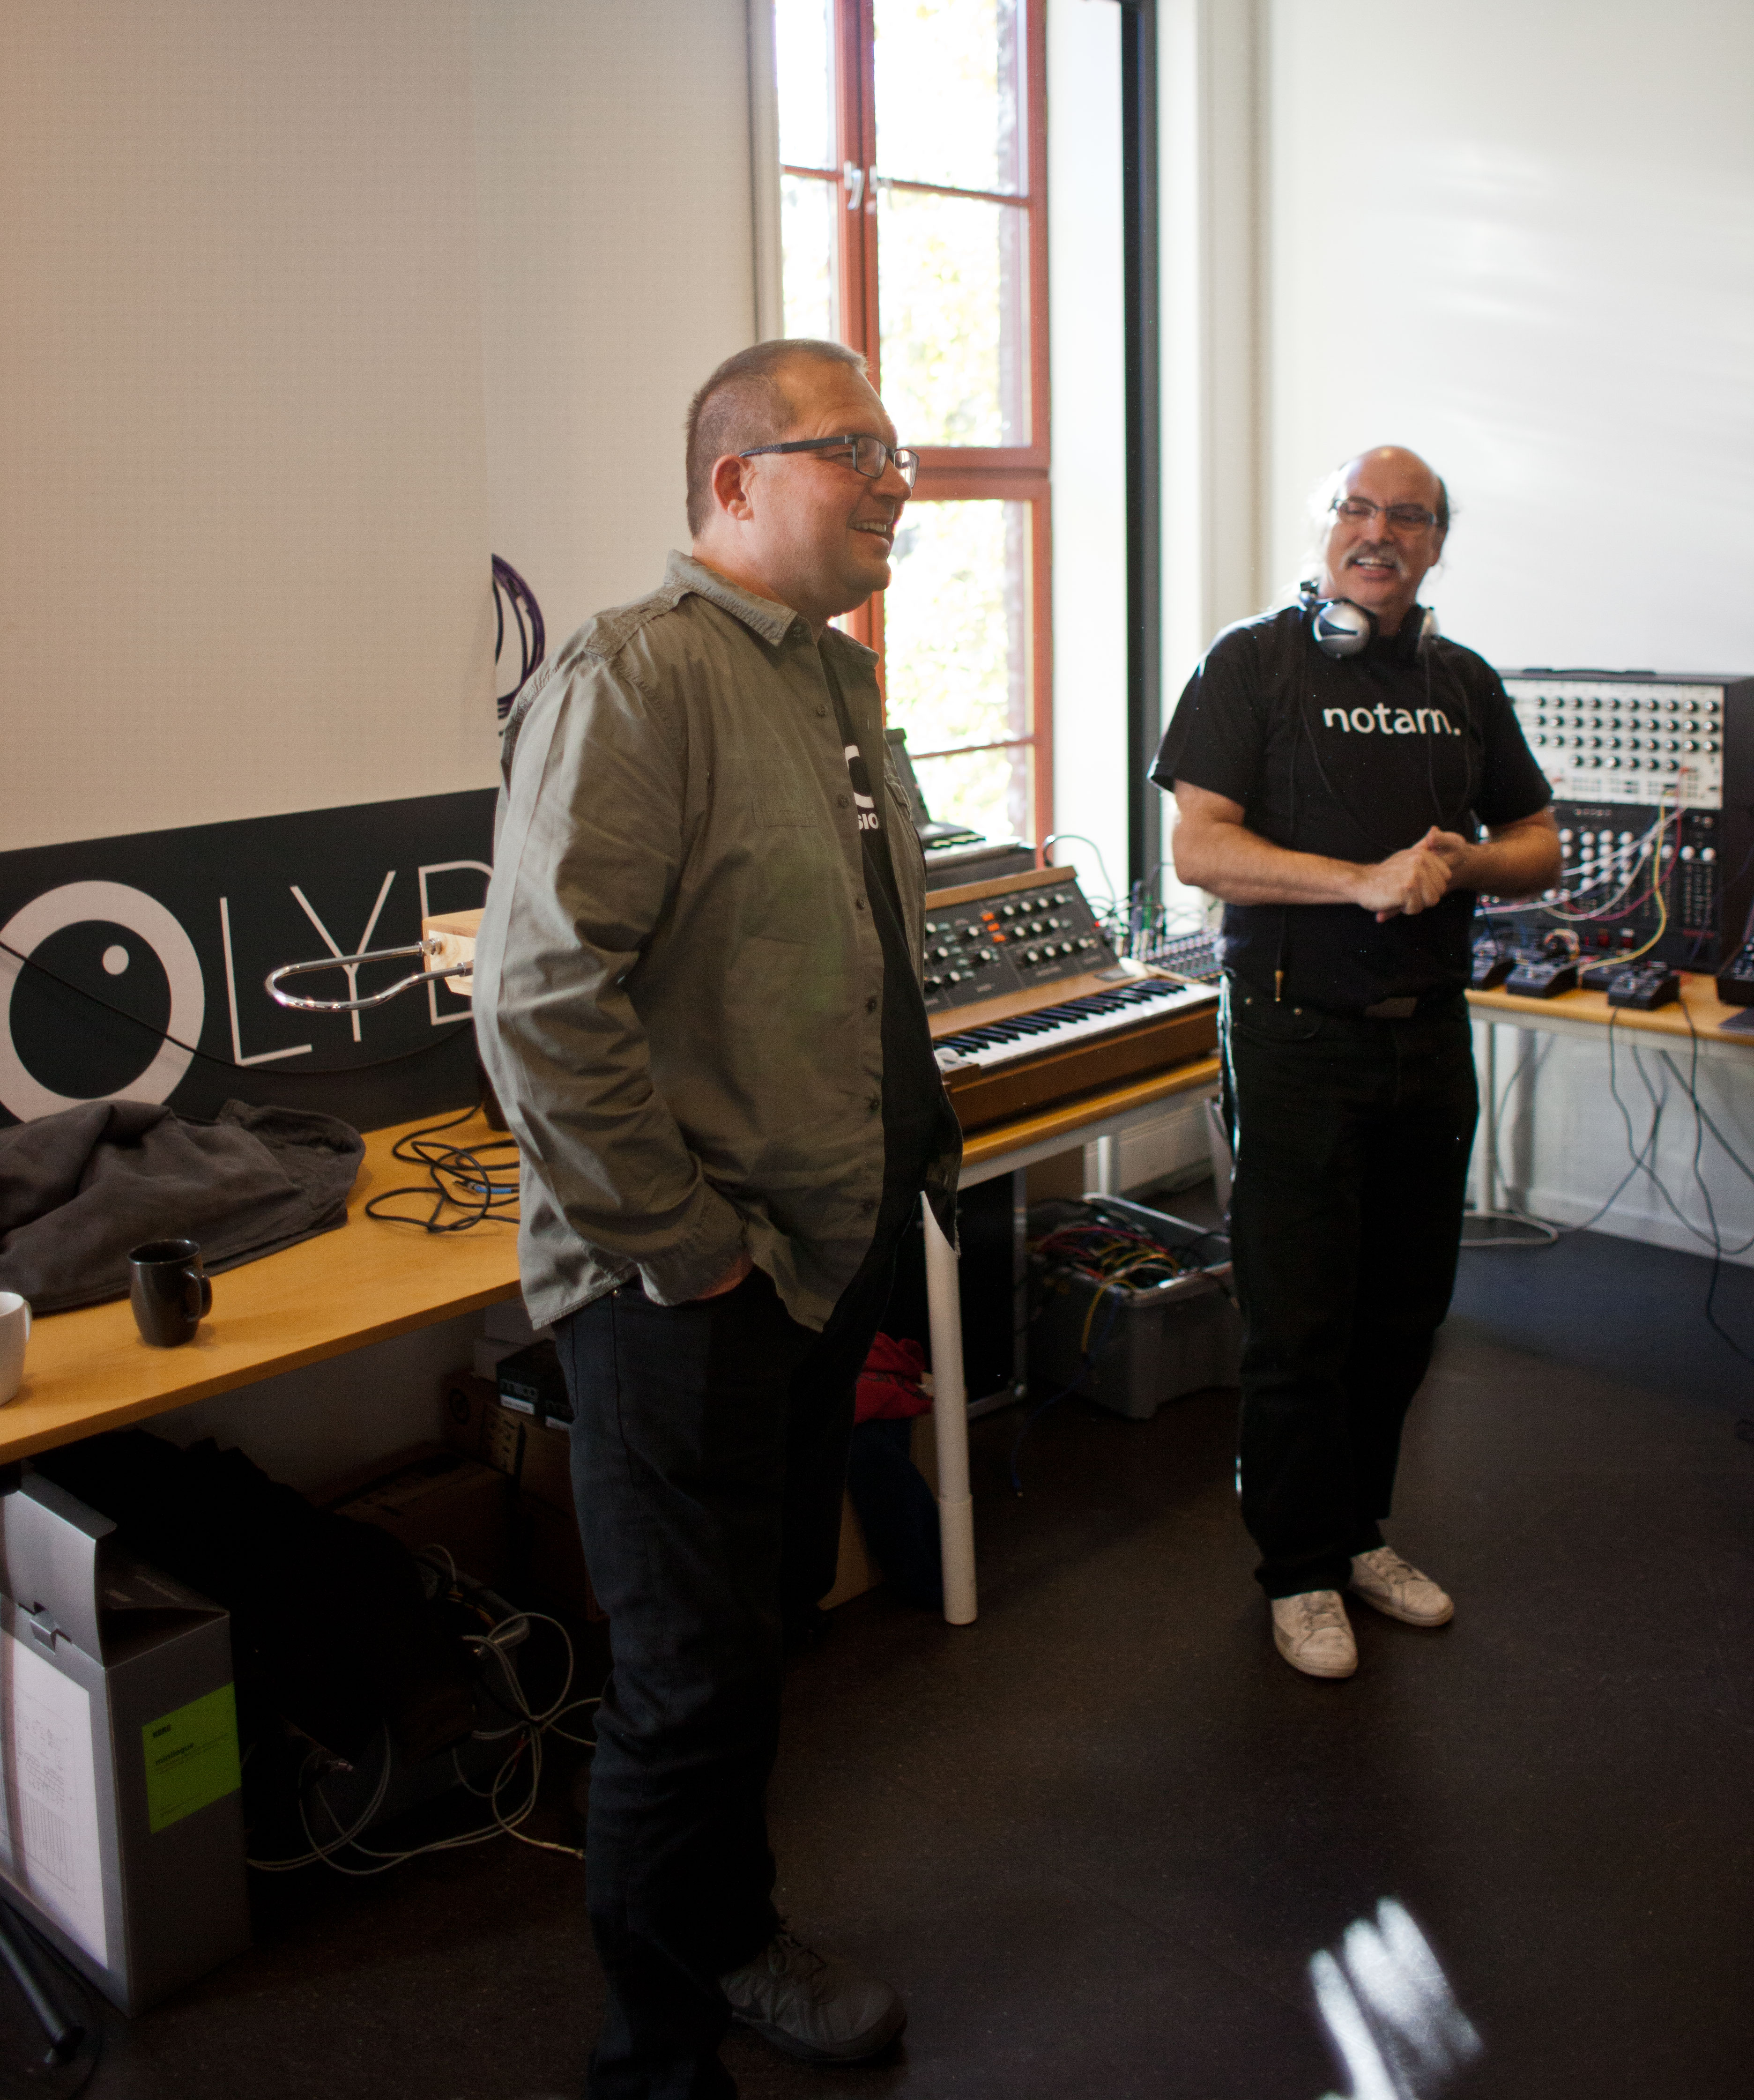 Michael Heim from Moog Music and Terje Winther